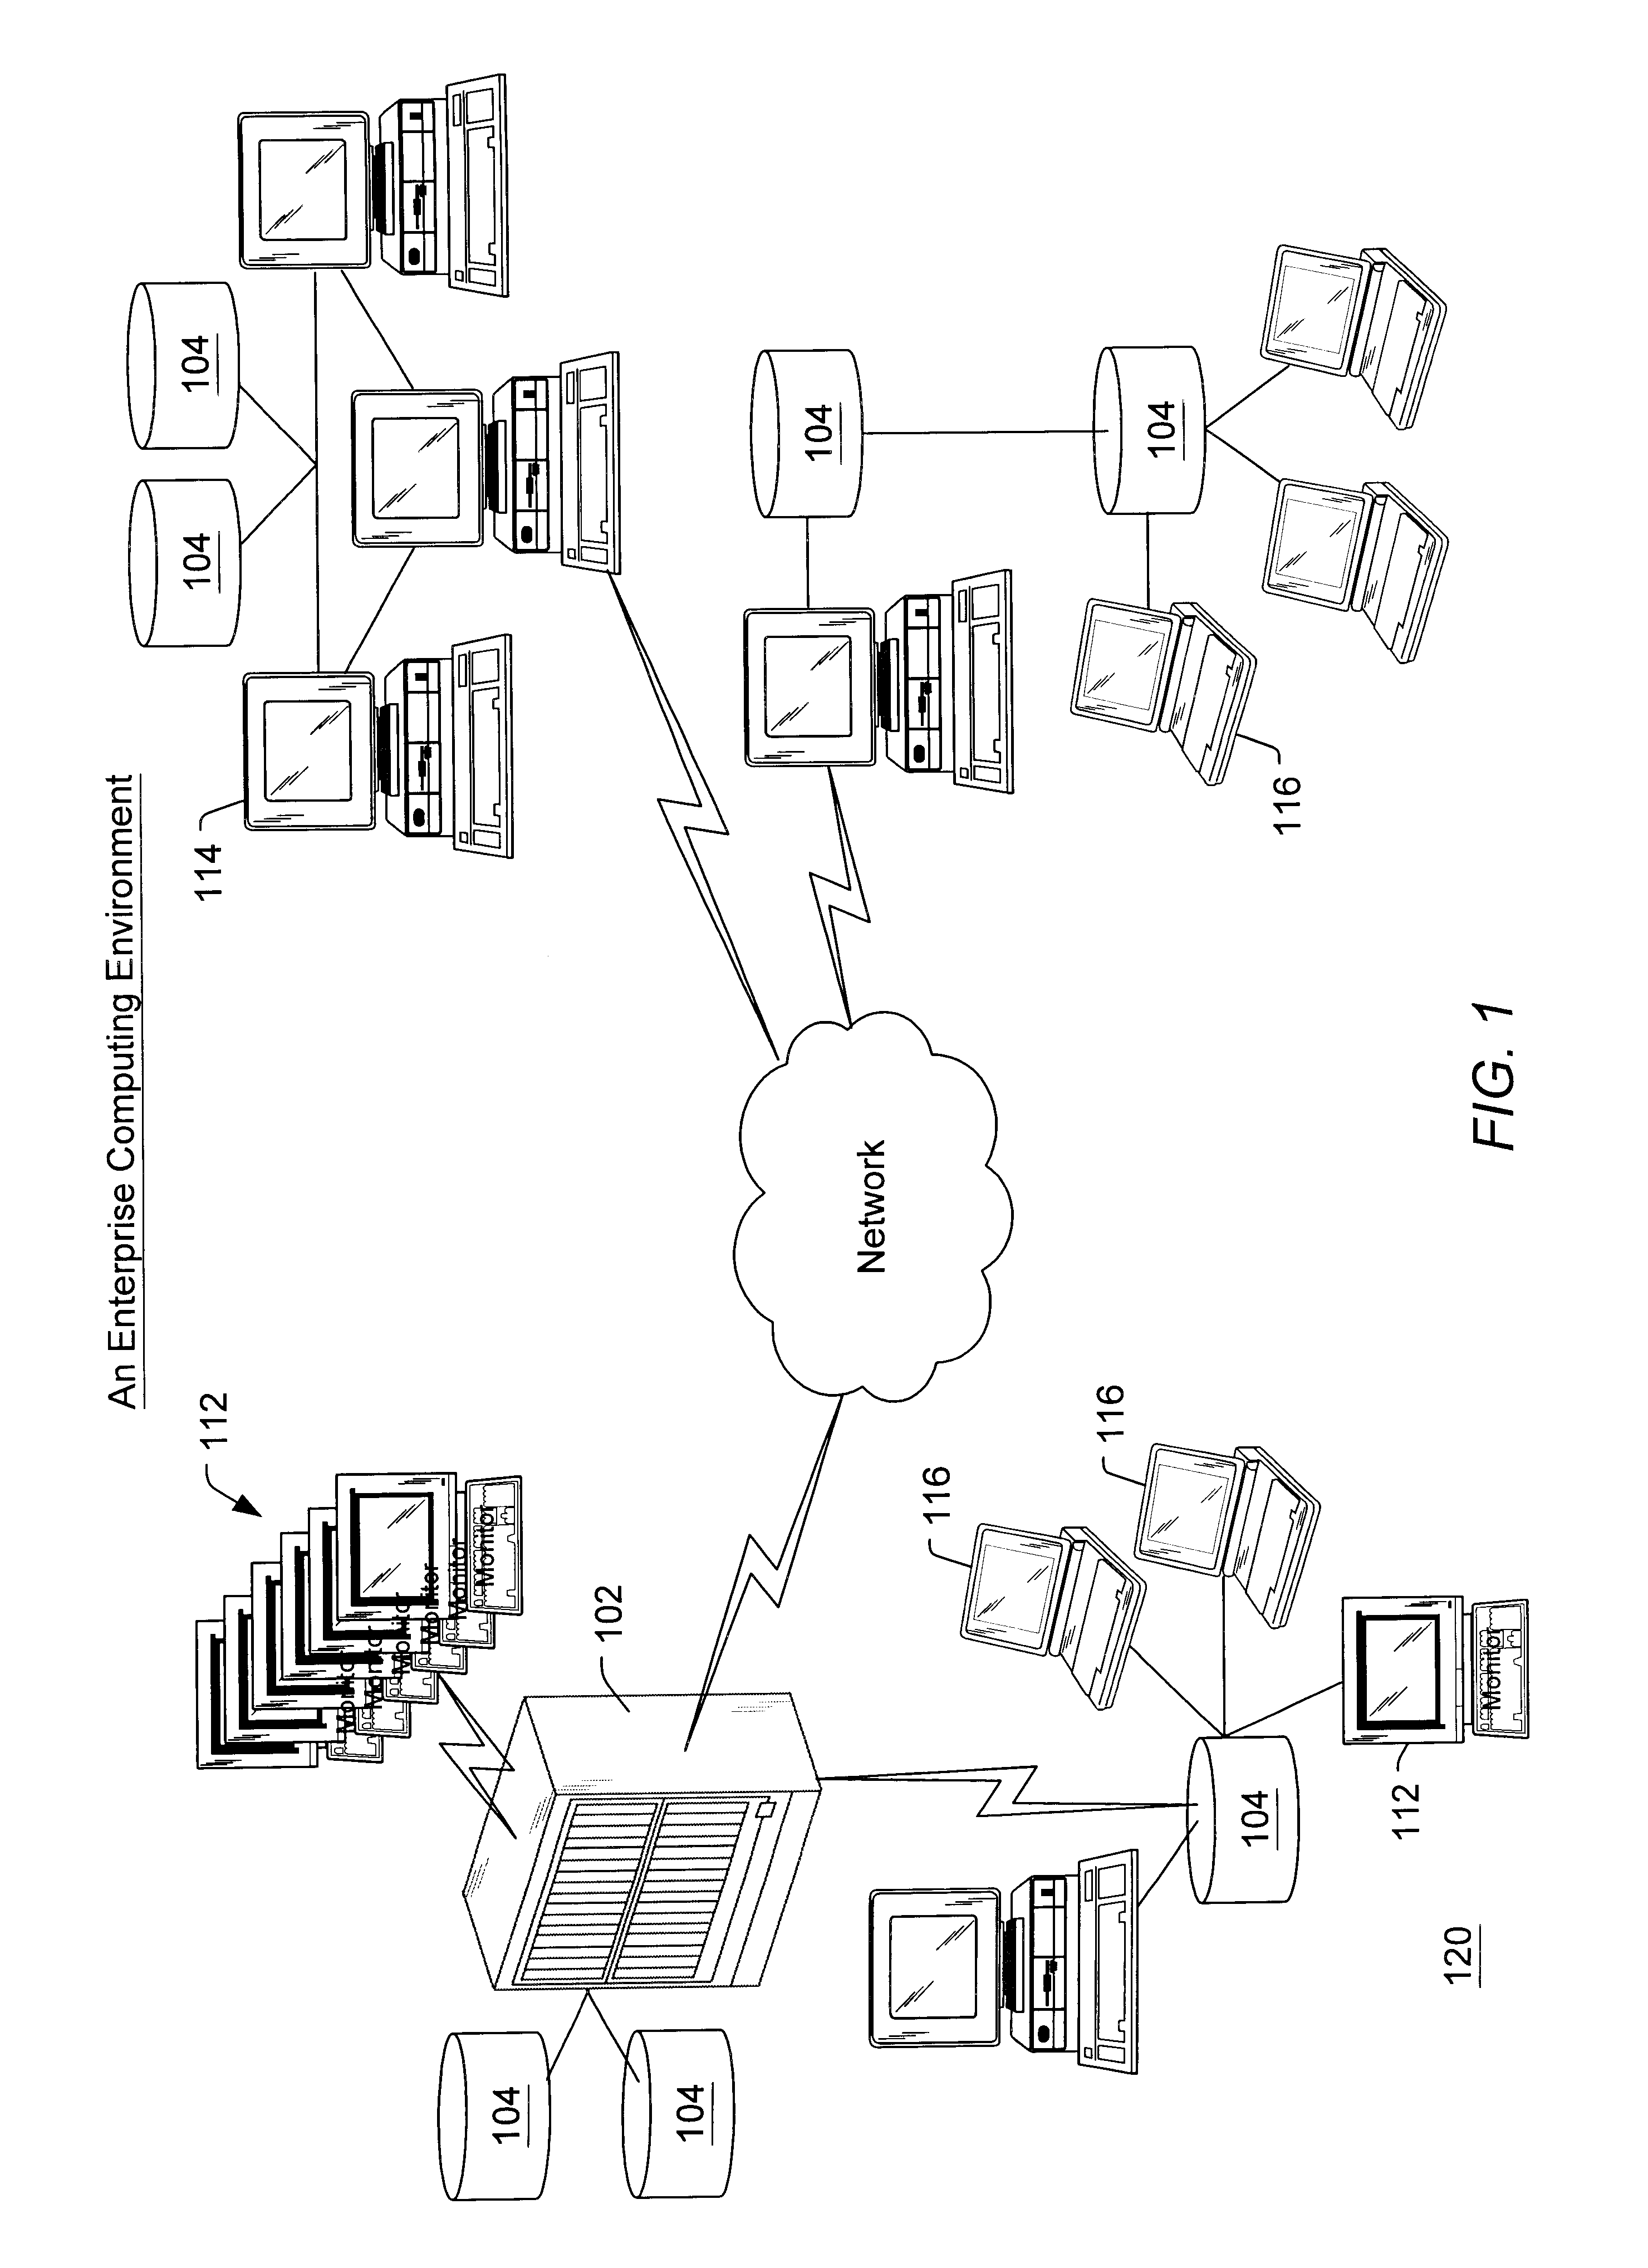 System and method for analyzing a database for on-line reorganization